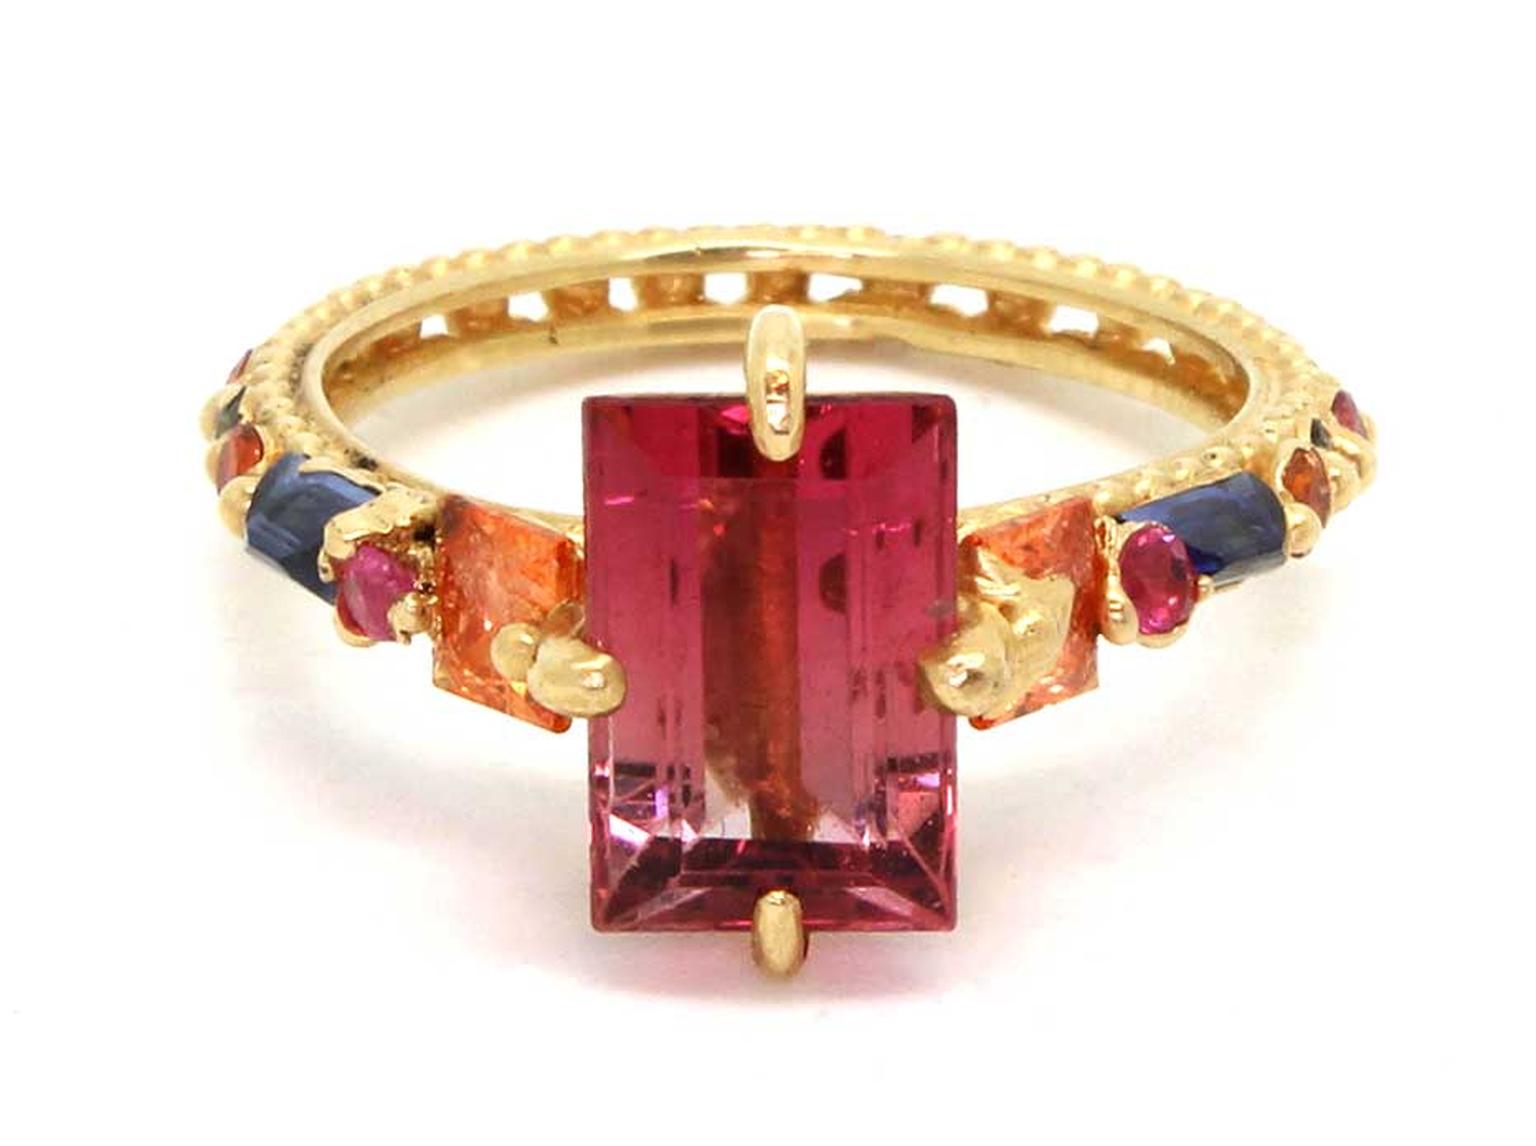 Polly Wales faded pink tourmaline ring with orange, pink and blue sapphires